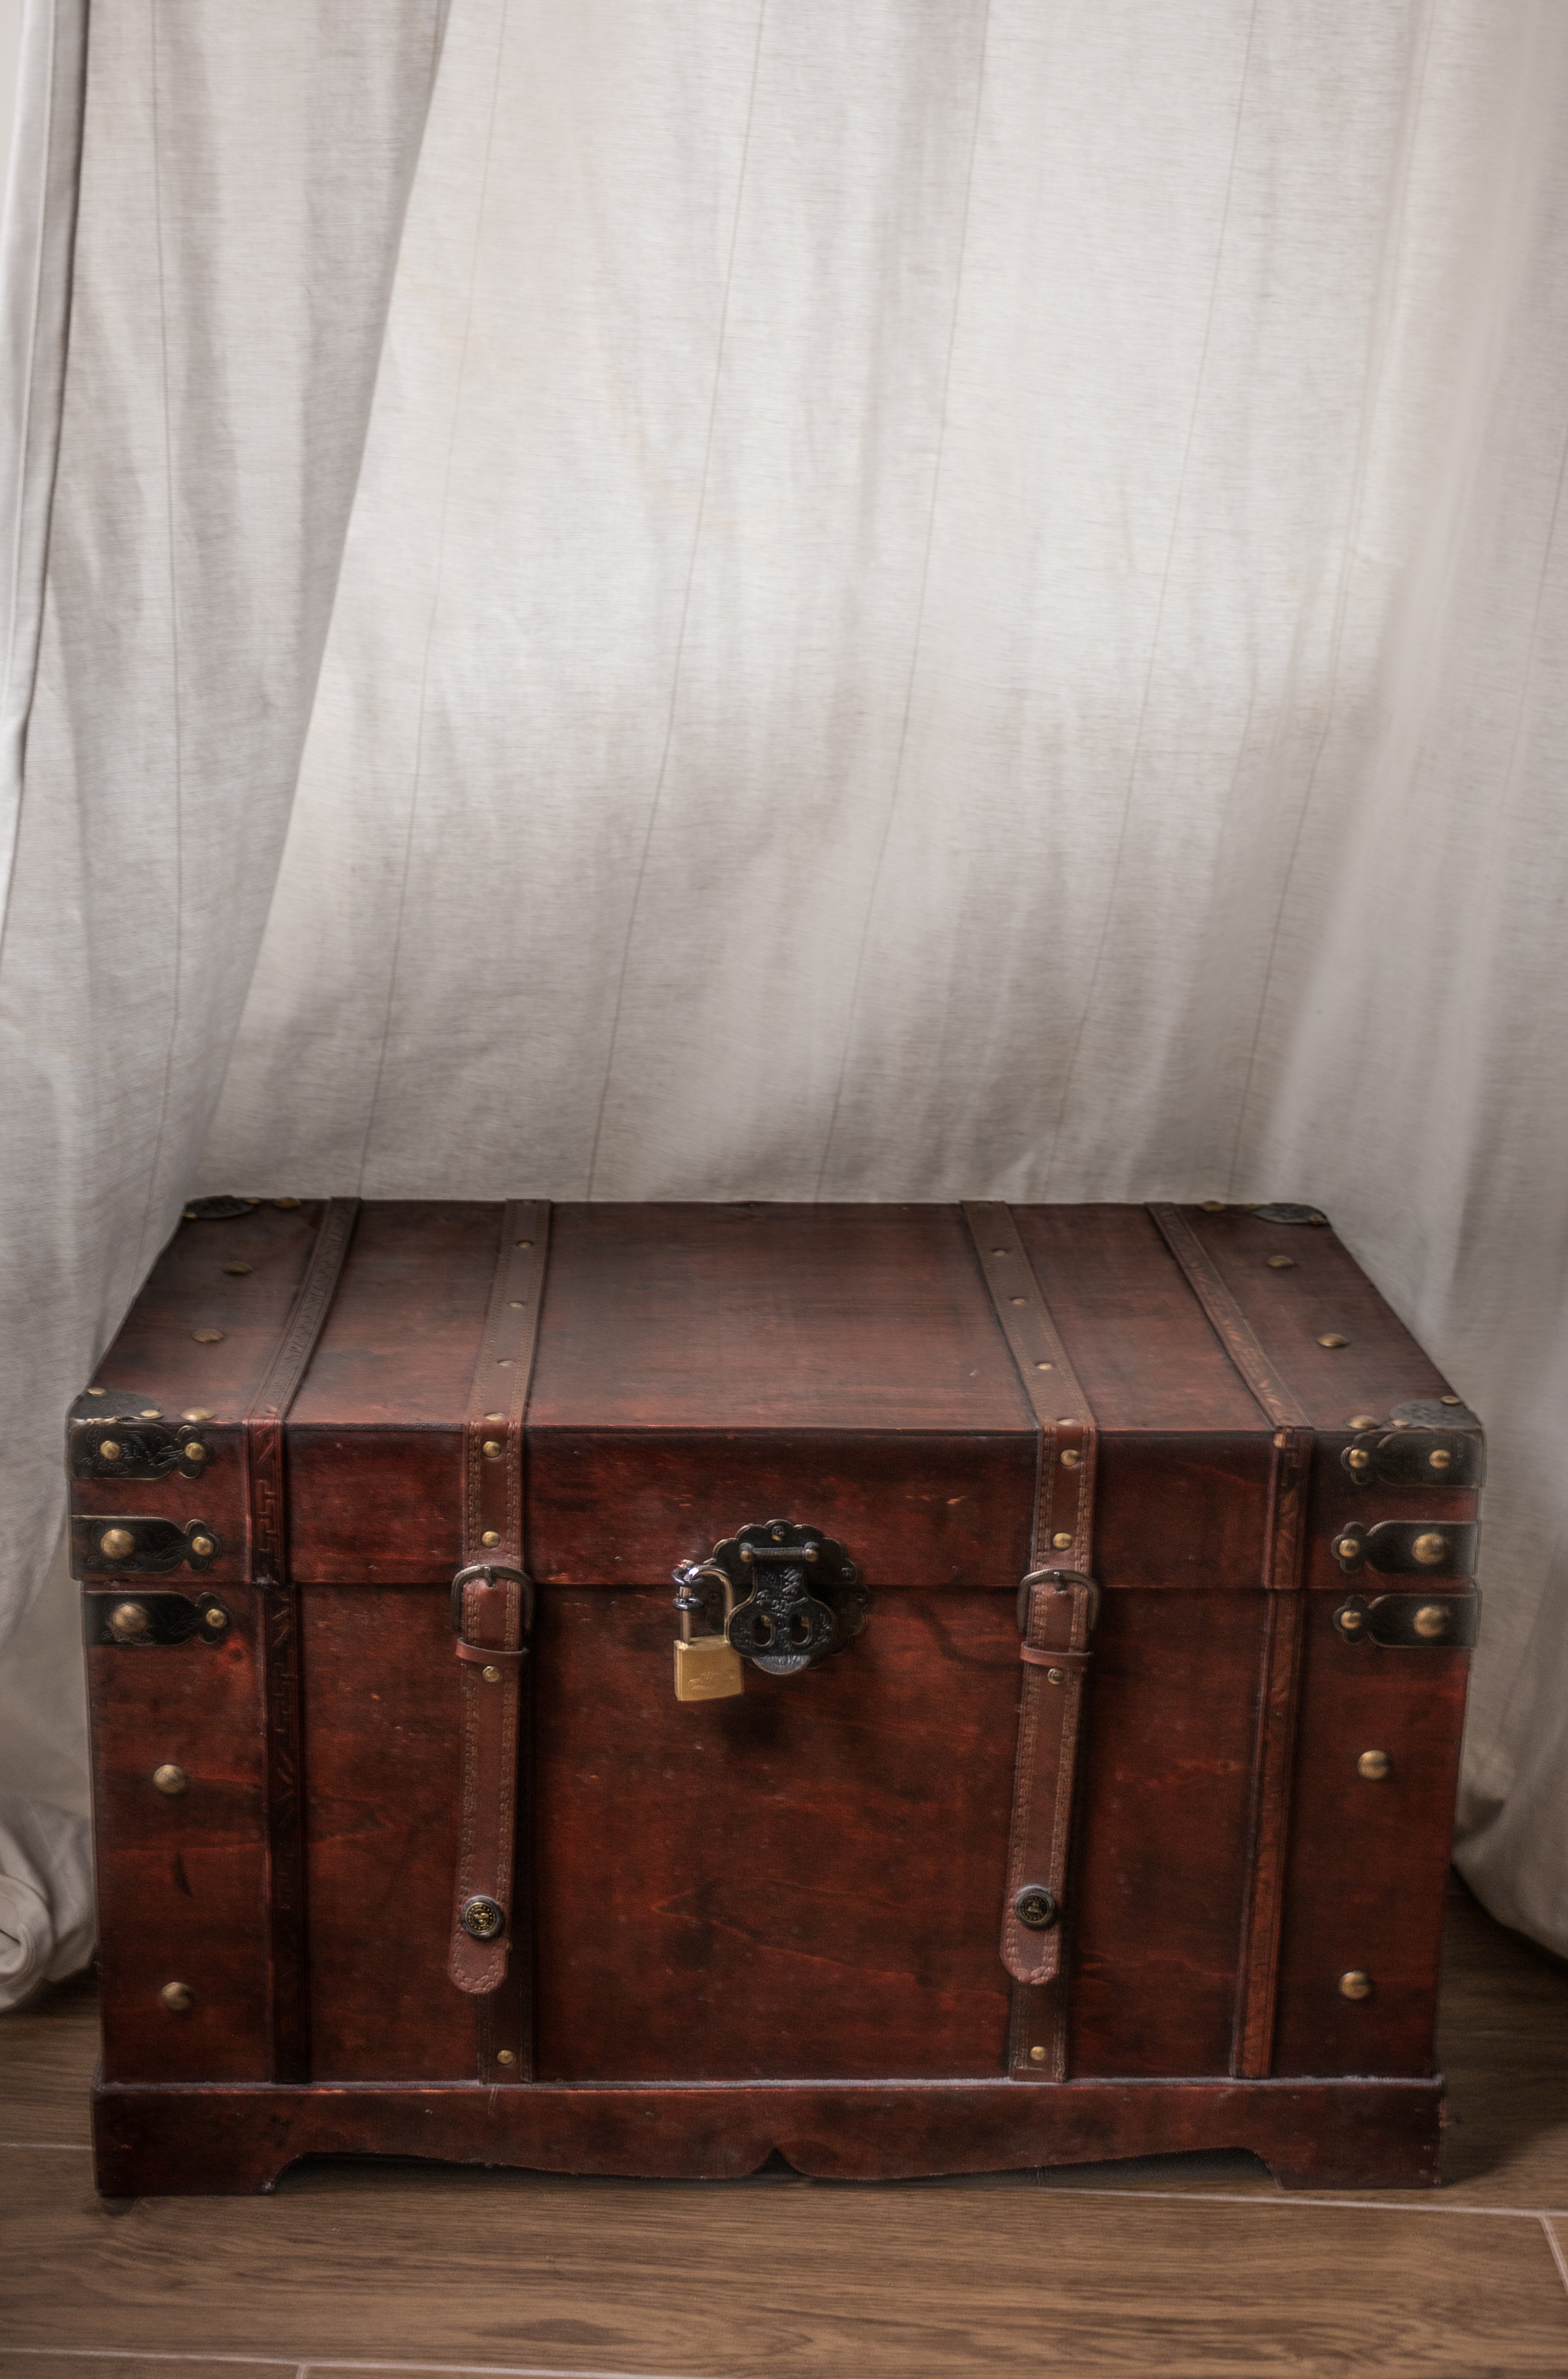 The brothers found a wooden chest with artifacts, but they did not know how valuable those were until years later. | Source: Unsplash